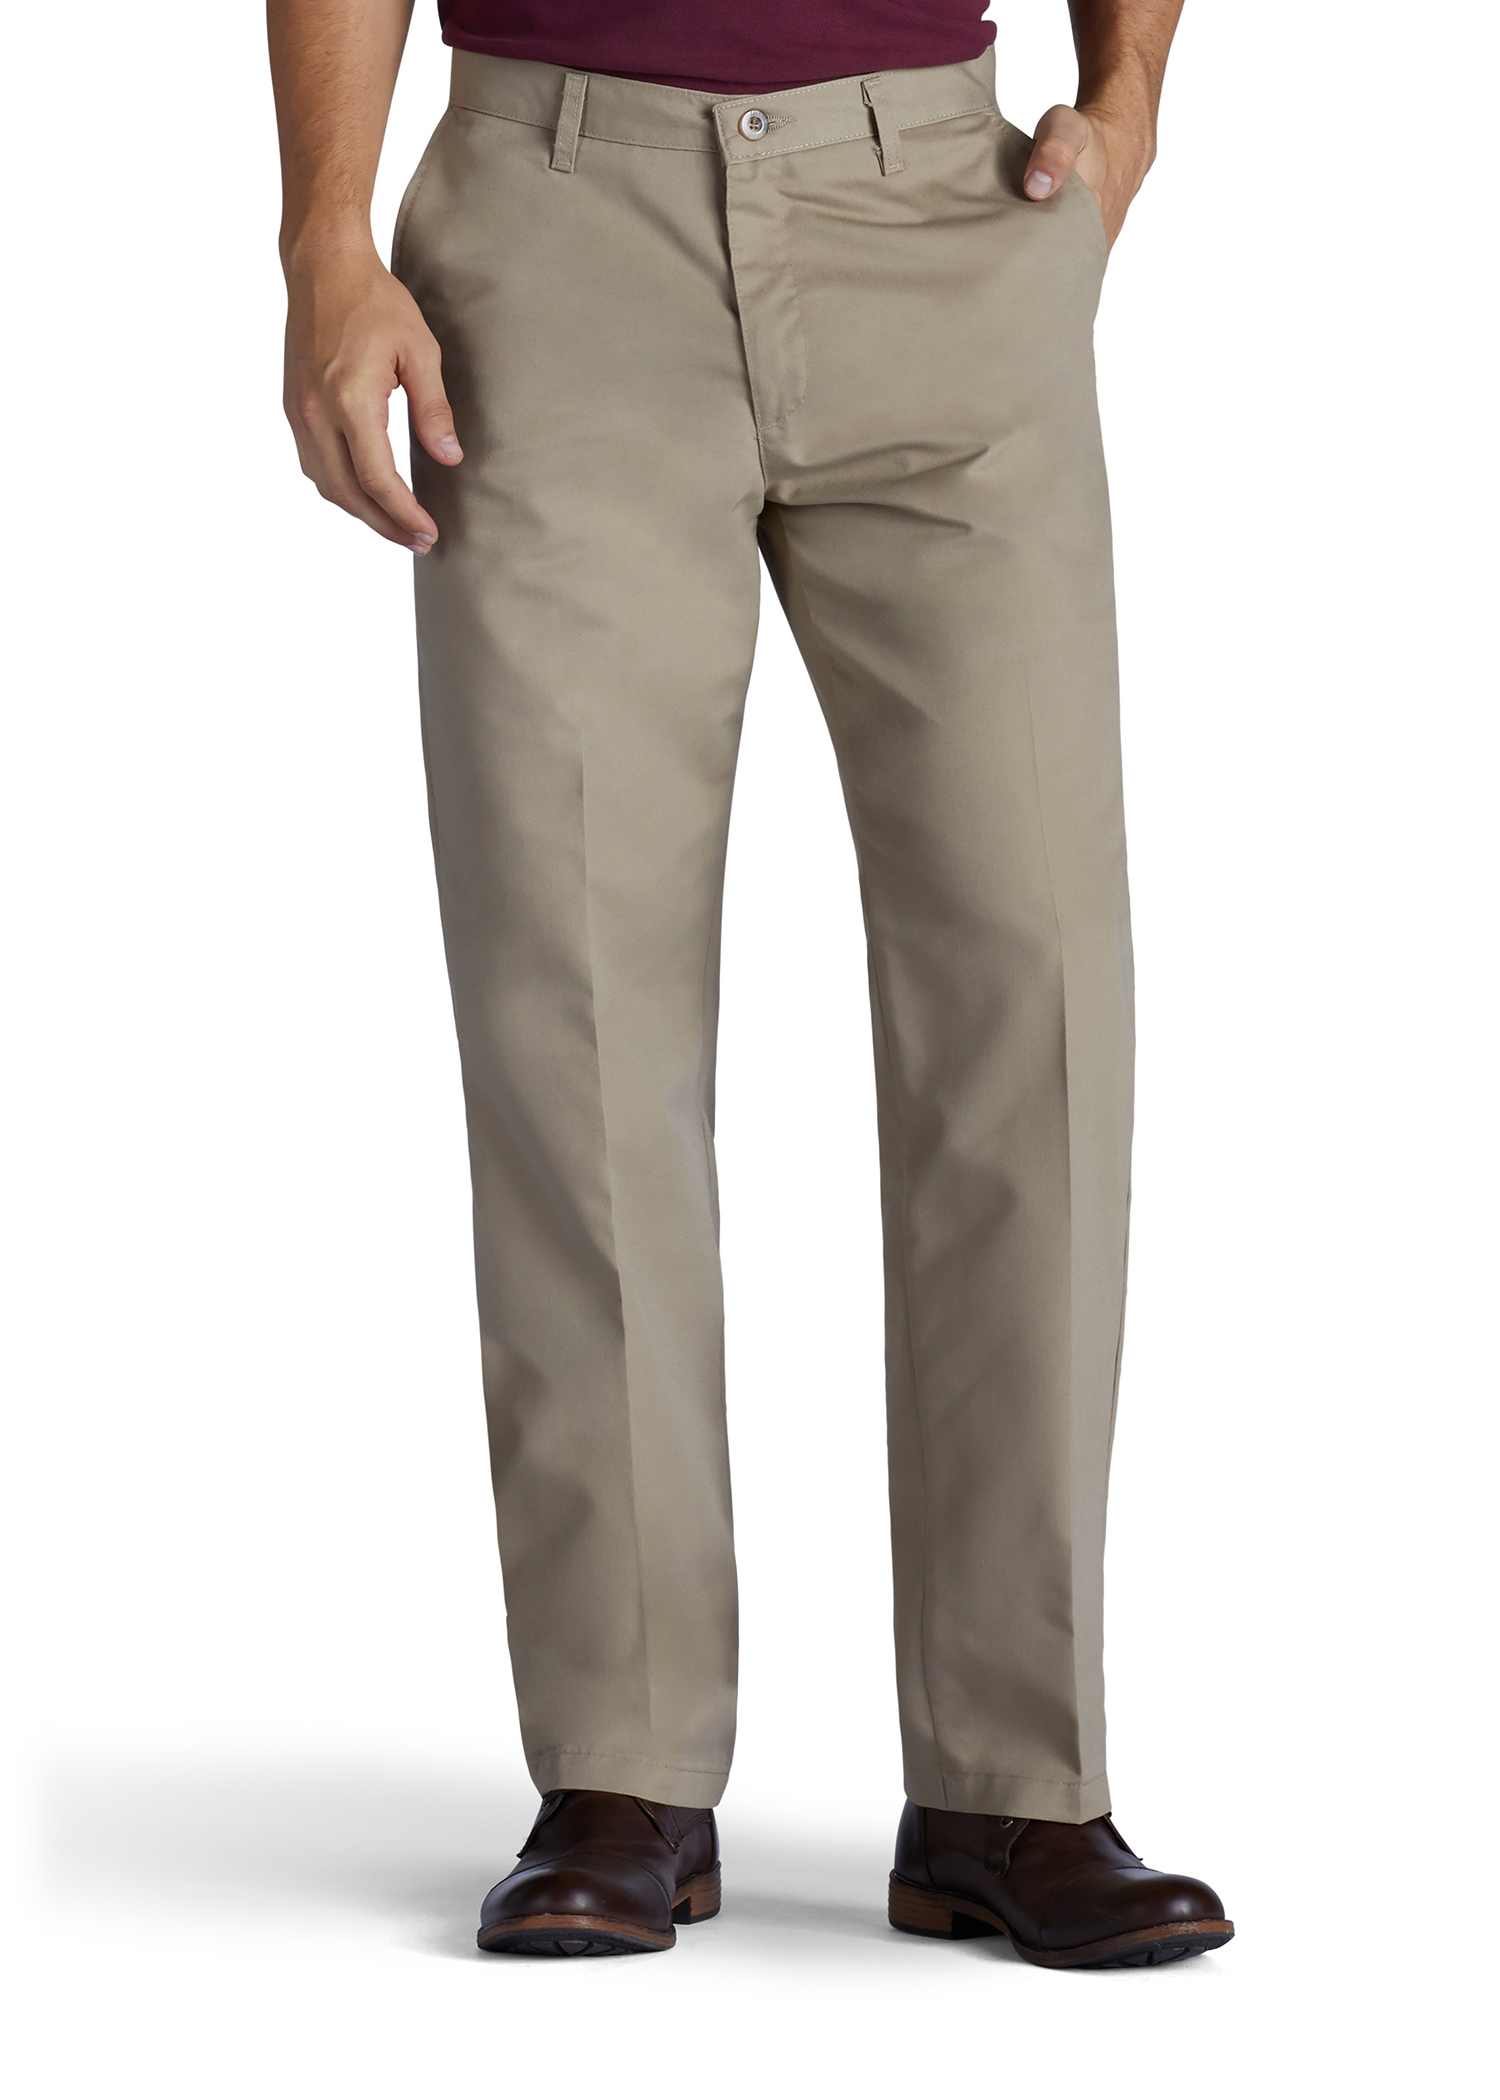 LEE Mens Total Freedom Stretch Relaxed Fit Flat Front Pant